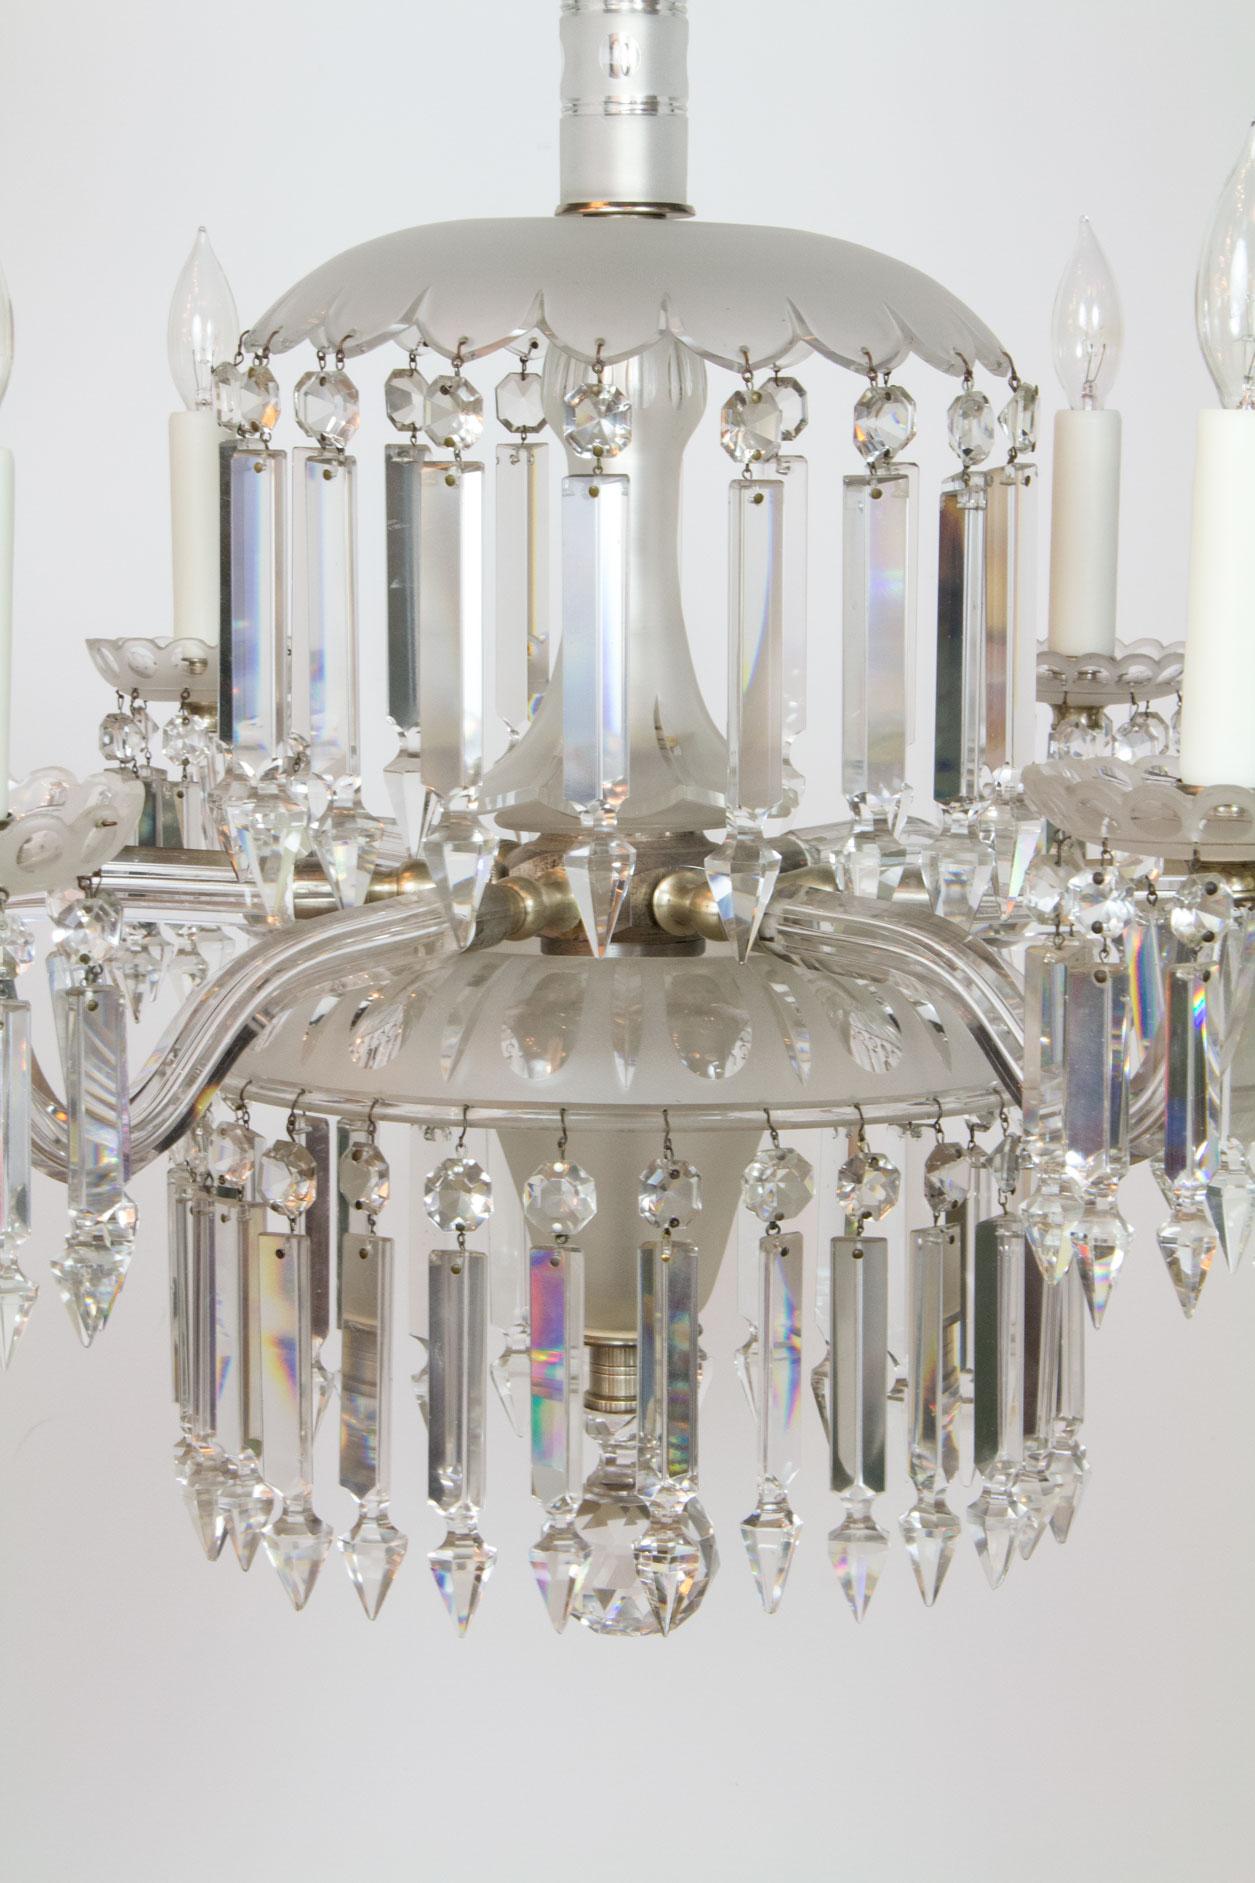 Victorian frosted glass and crystal chandelier. Originally gas. crown stem piece frosted and crosshatched glass, hung with full cut spear crystals. Below is a petal shaped dish hung with another ring of crystals. A vase shaped frosted cut glass stem